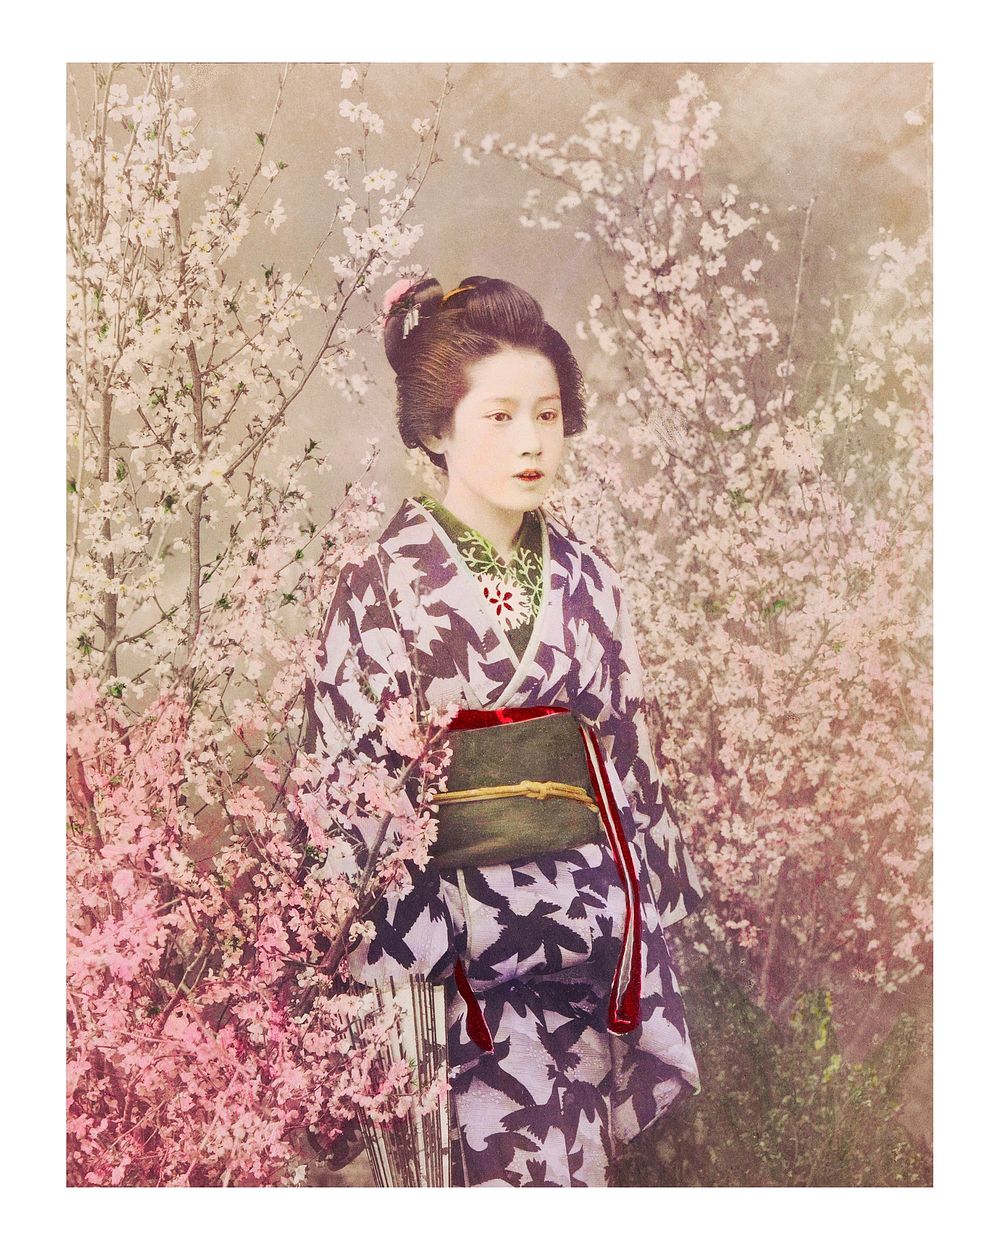 Geisha and cherry blossom vintage illustration wall art print and poster design remix from the original artwork.